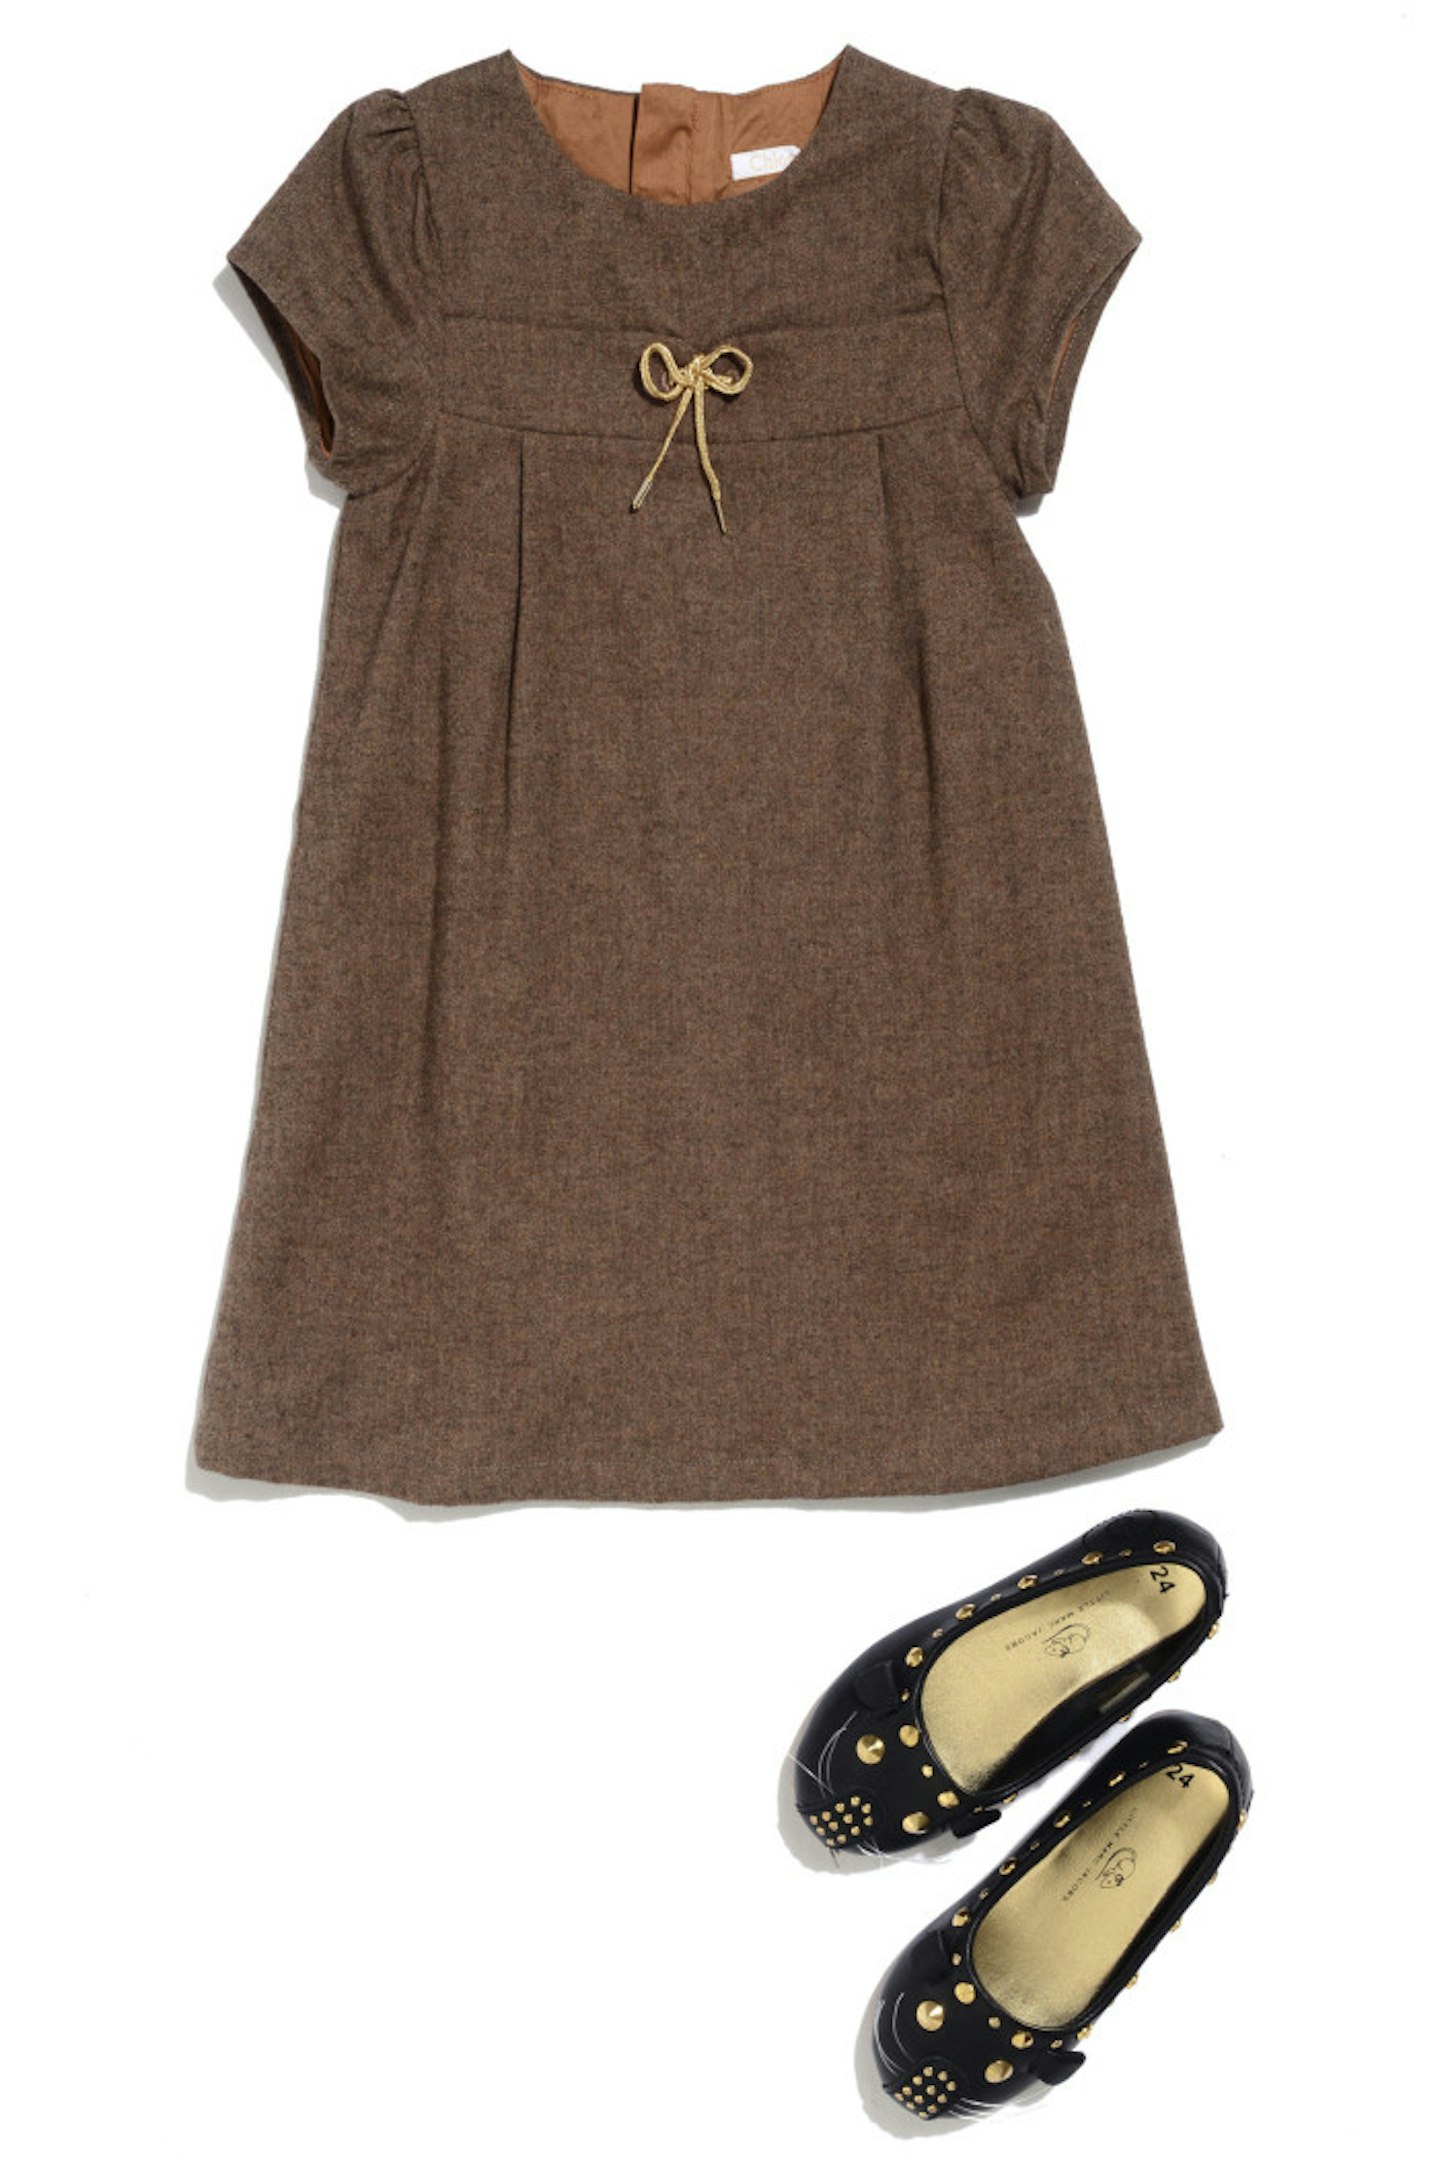 Chloe brown dress with gold bow and Marc Jacobs black cat pumps